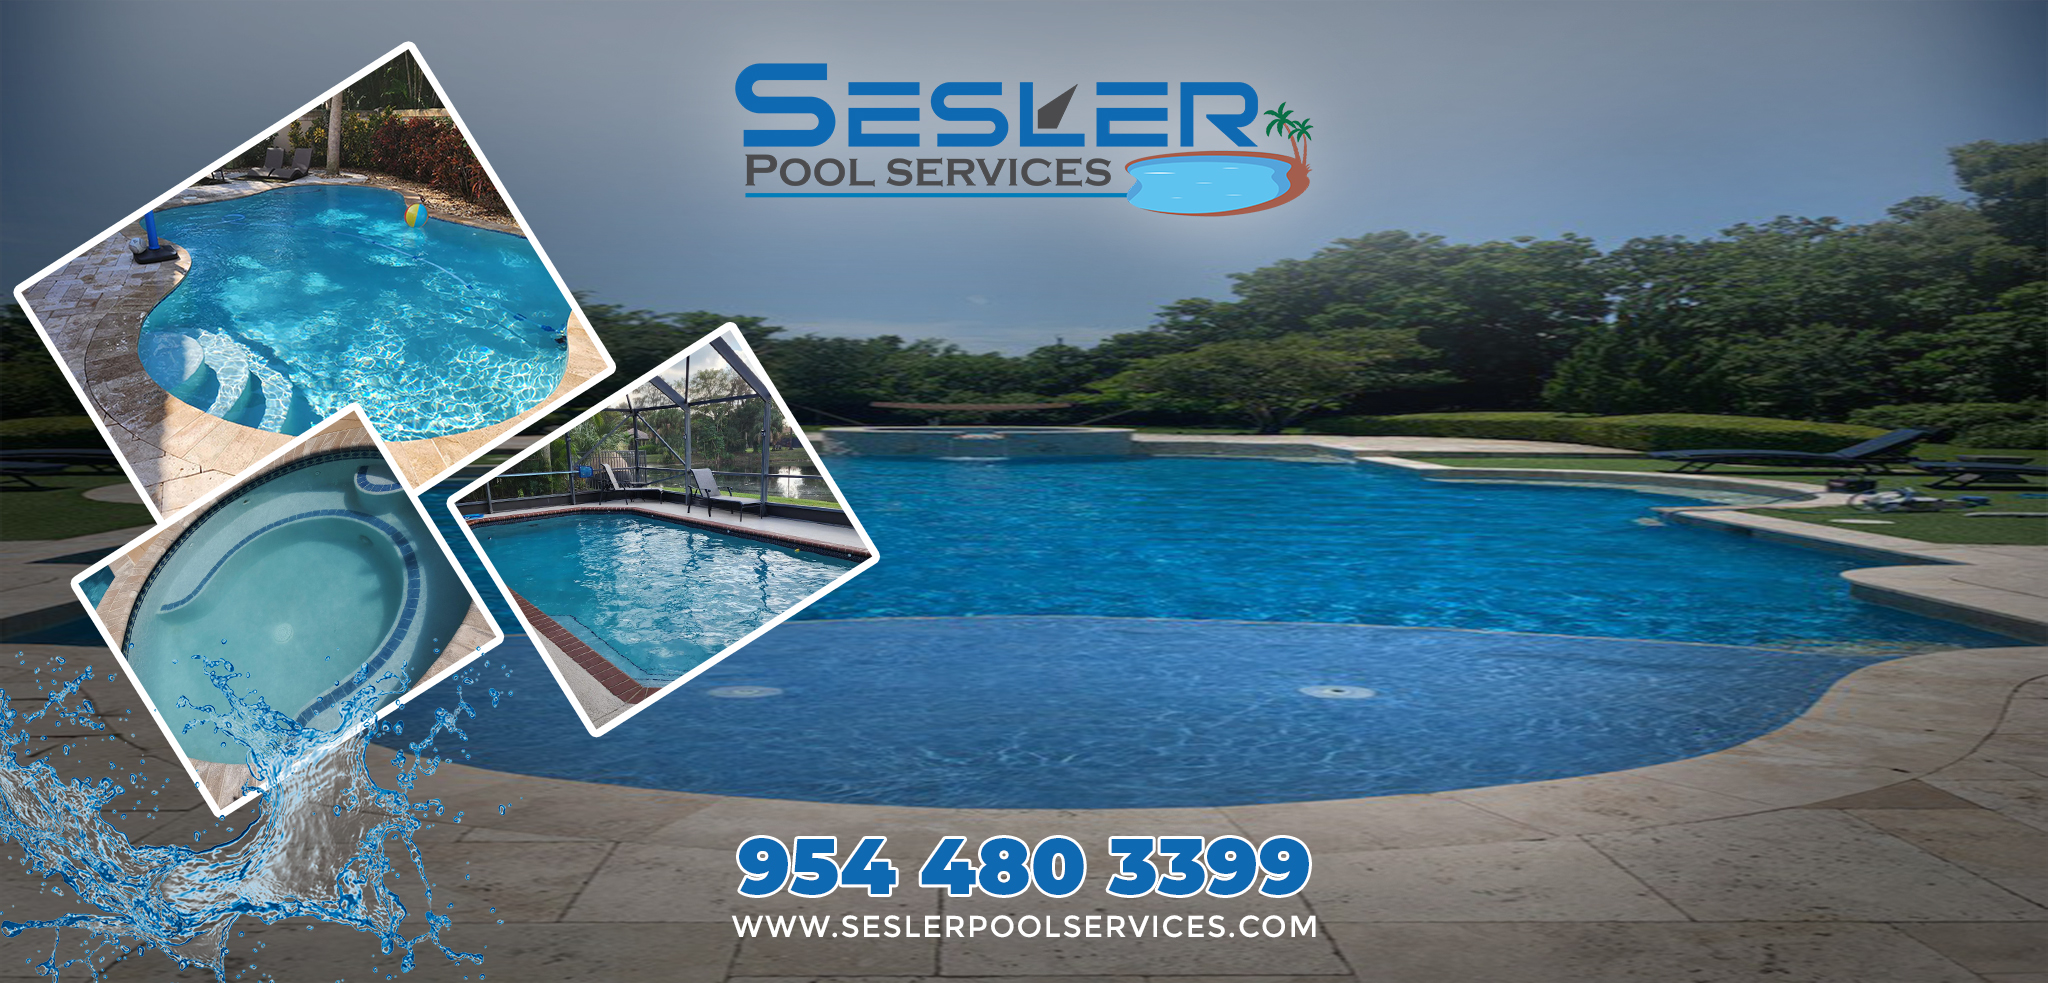 Sesler Pools Cleaning Services Florida